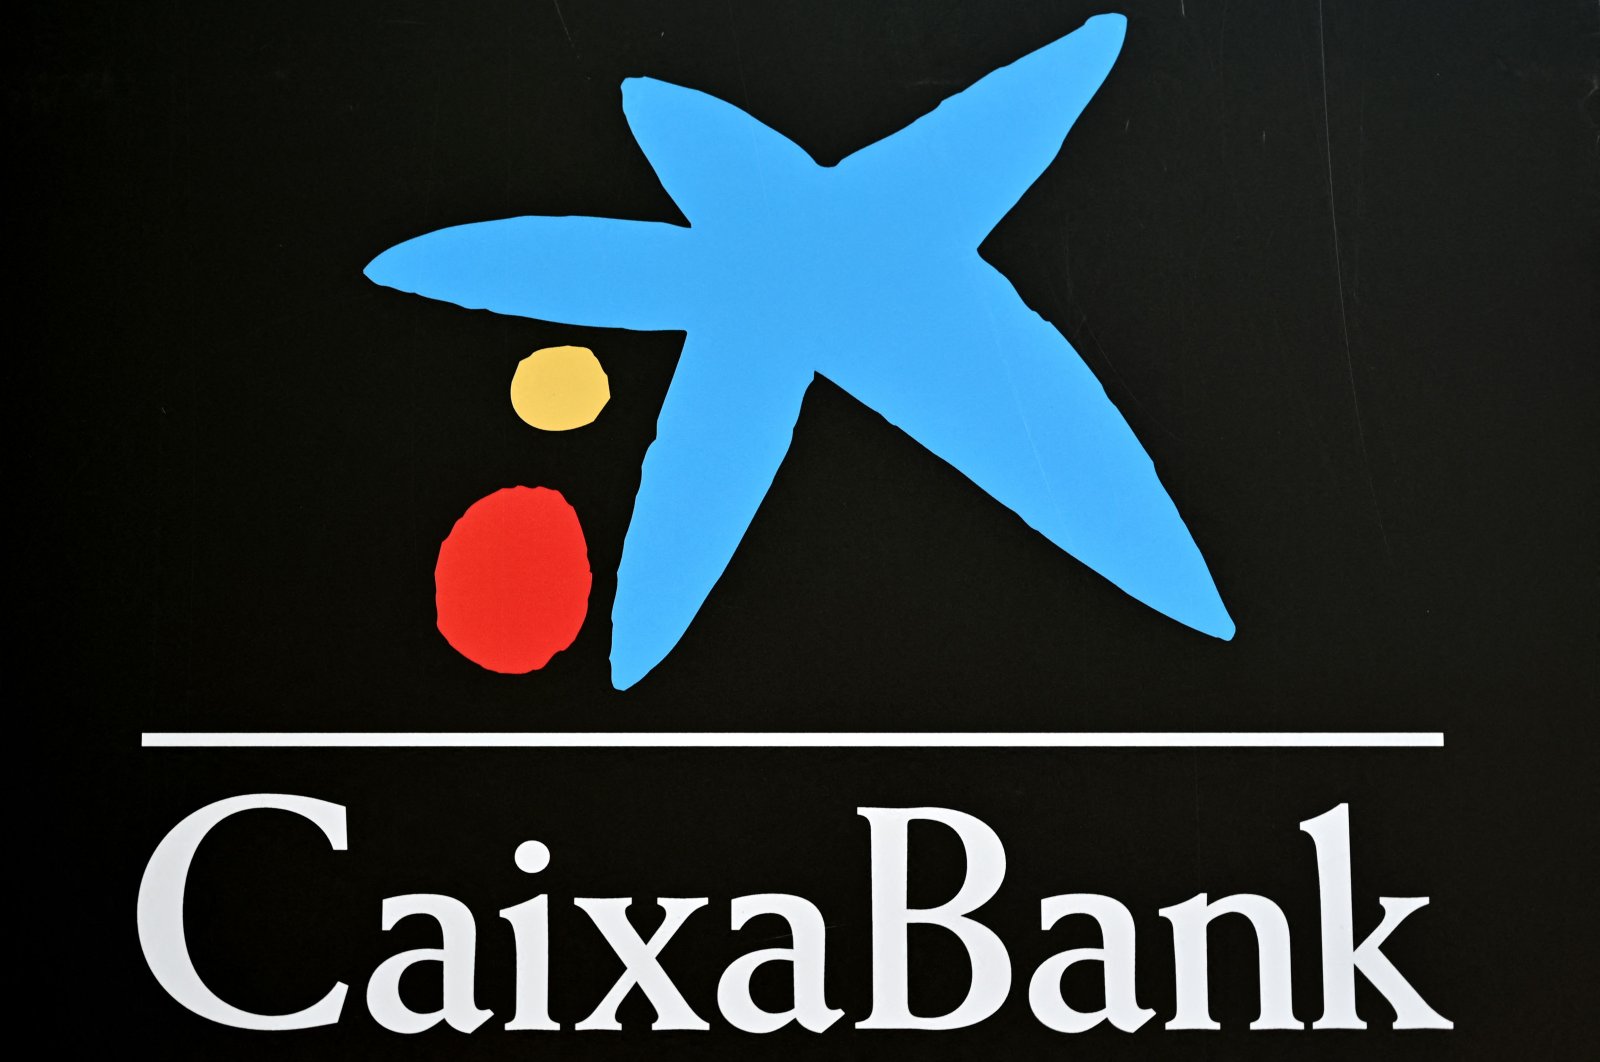 Spanish bank CaixaBank's logo in Madrid, Spain, Sept. 4, 2020. (AFP Photo)